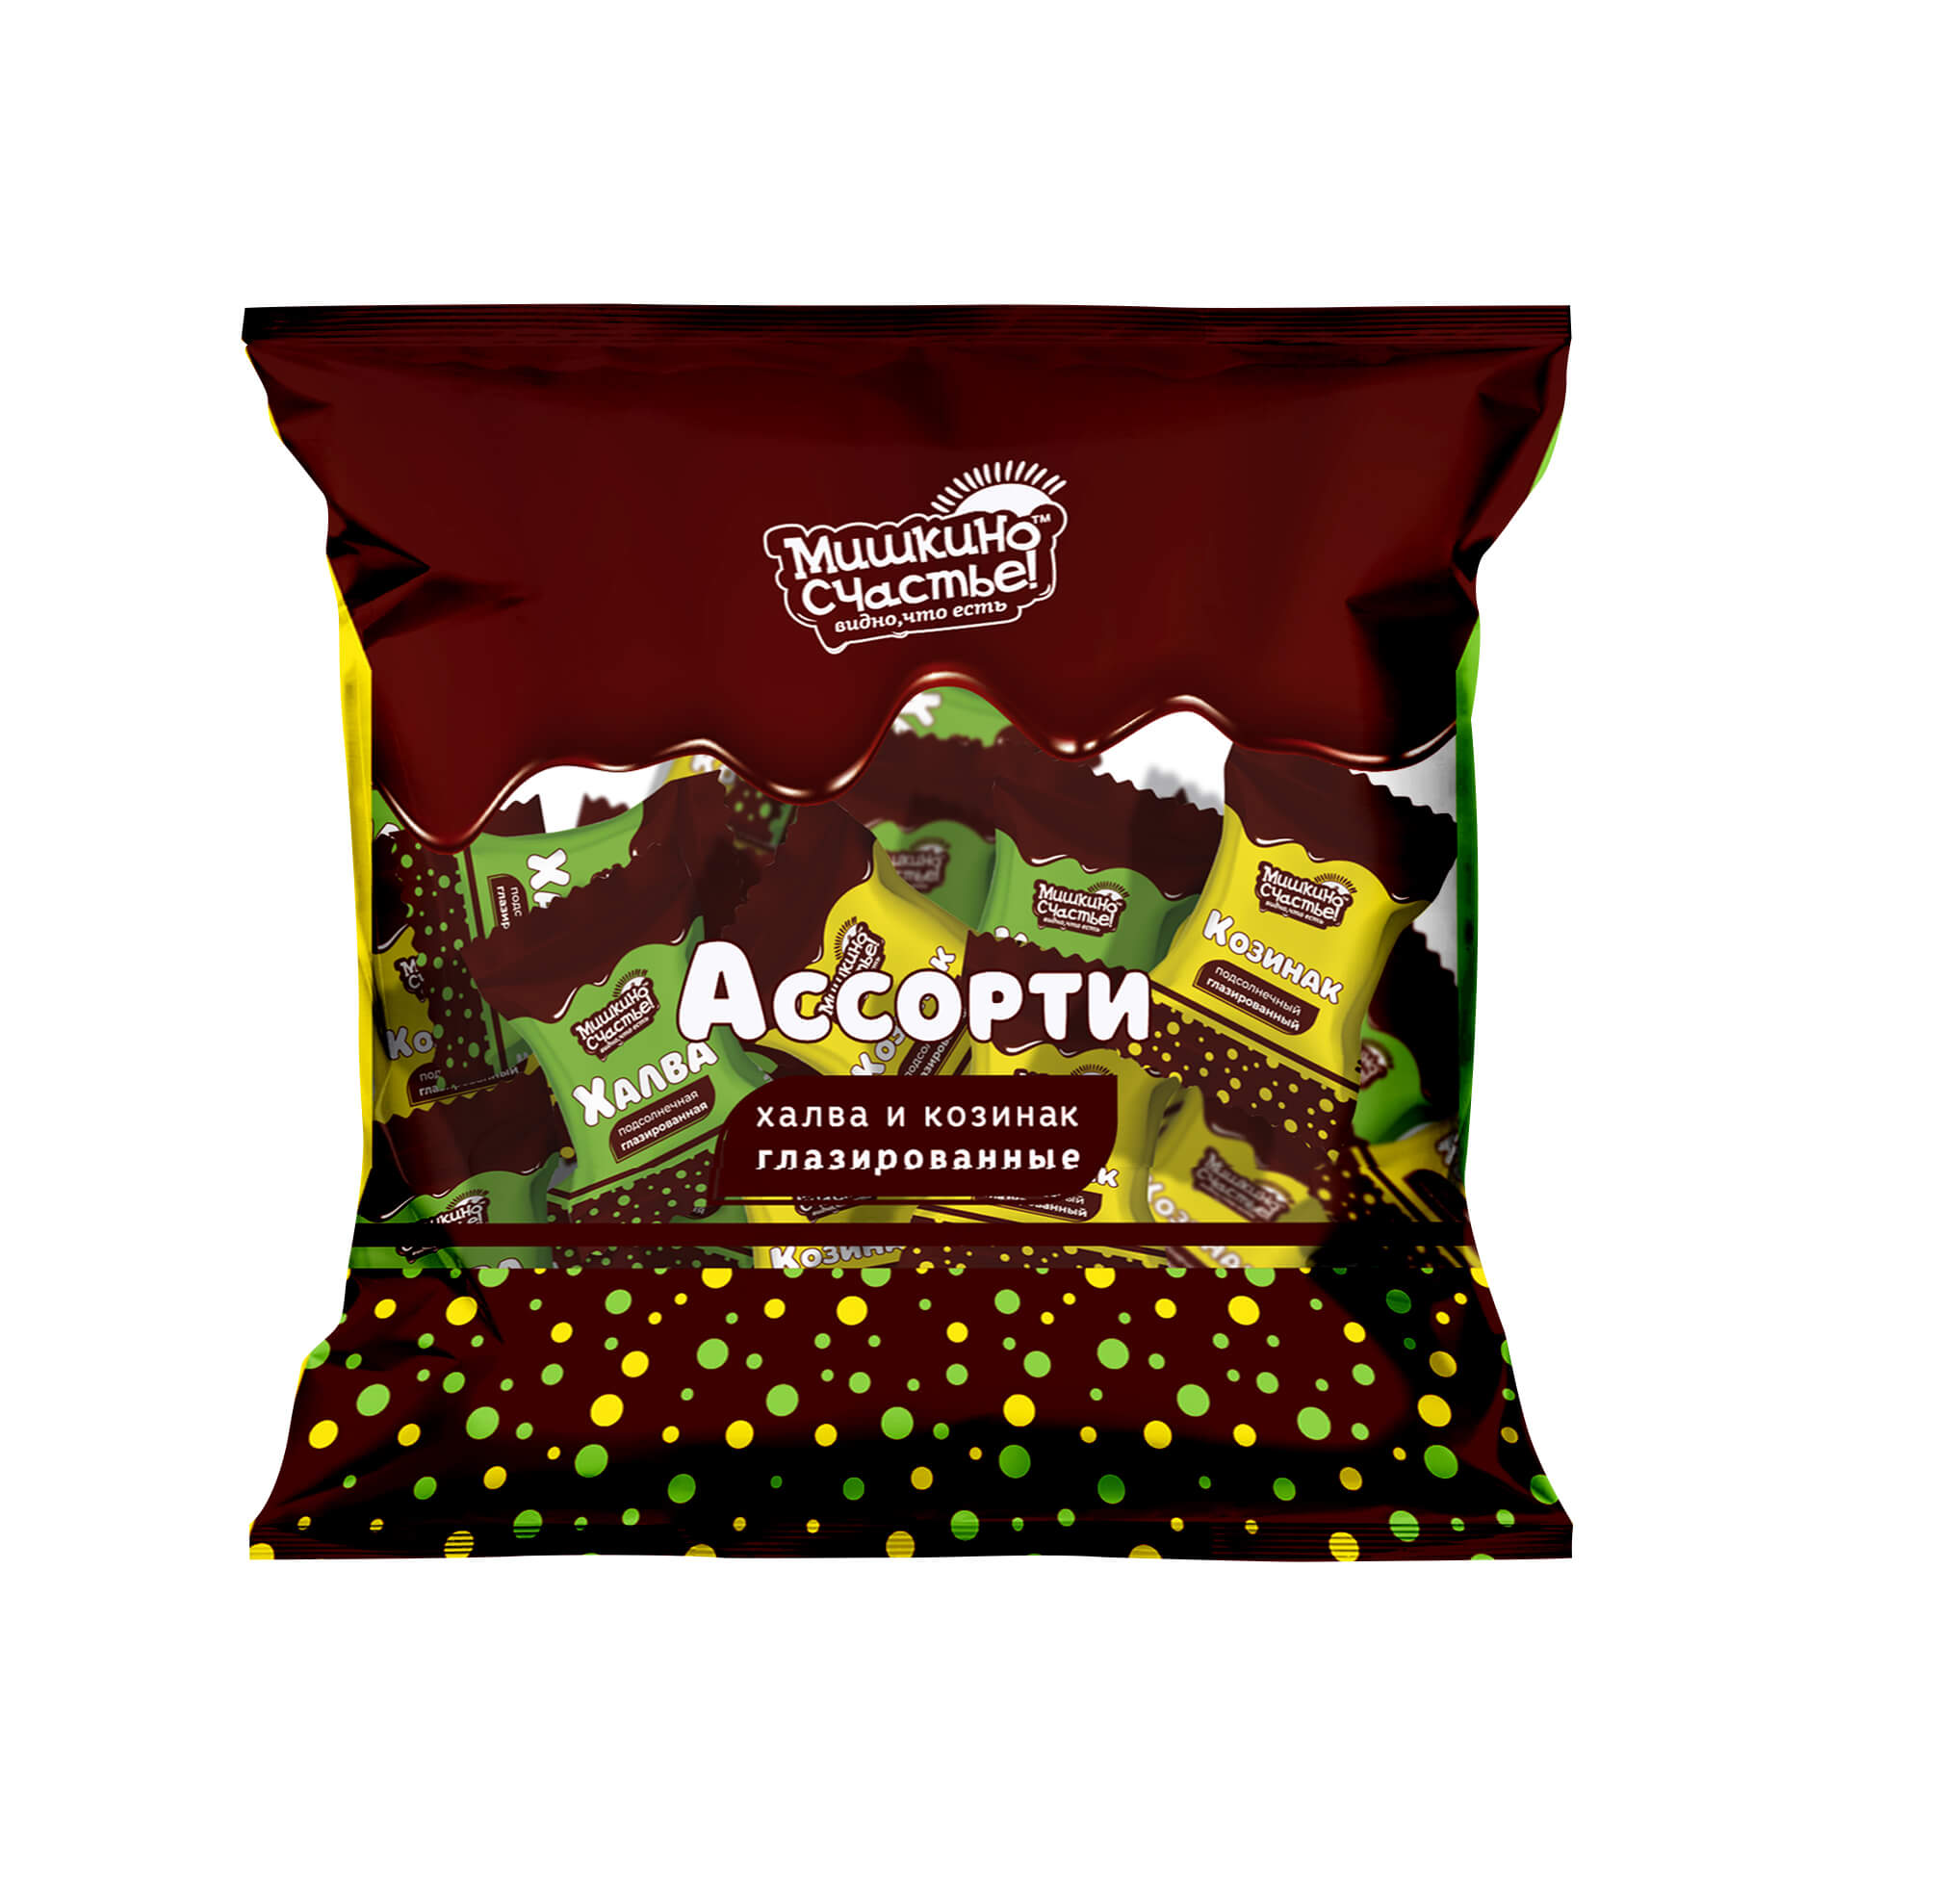 Allsorts sweets halva and brittle covered with glaze "Mishkino happiness" 240 g. (24), 240 g.